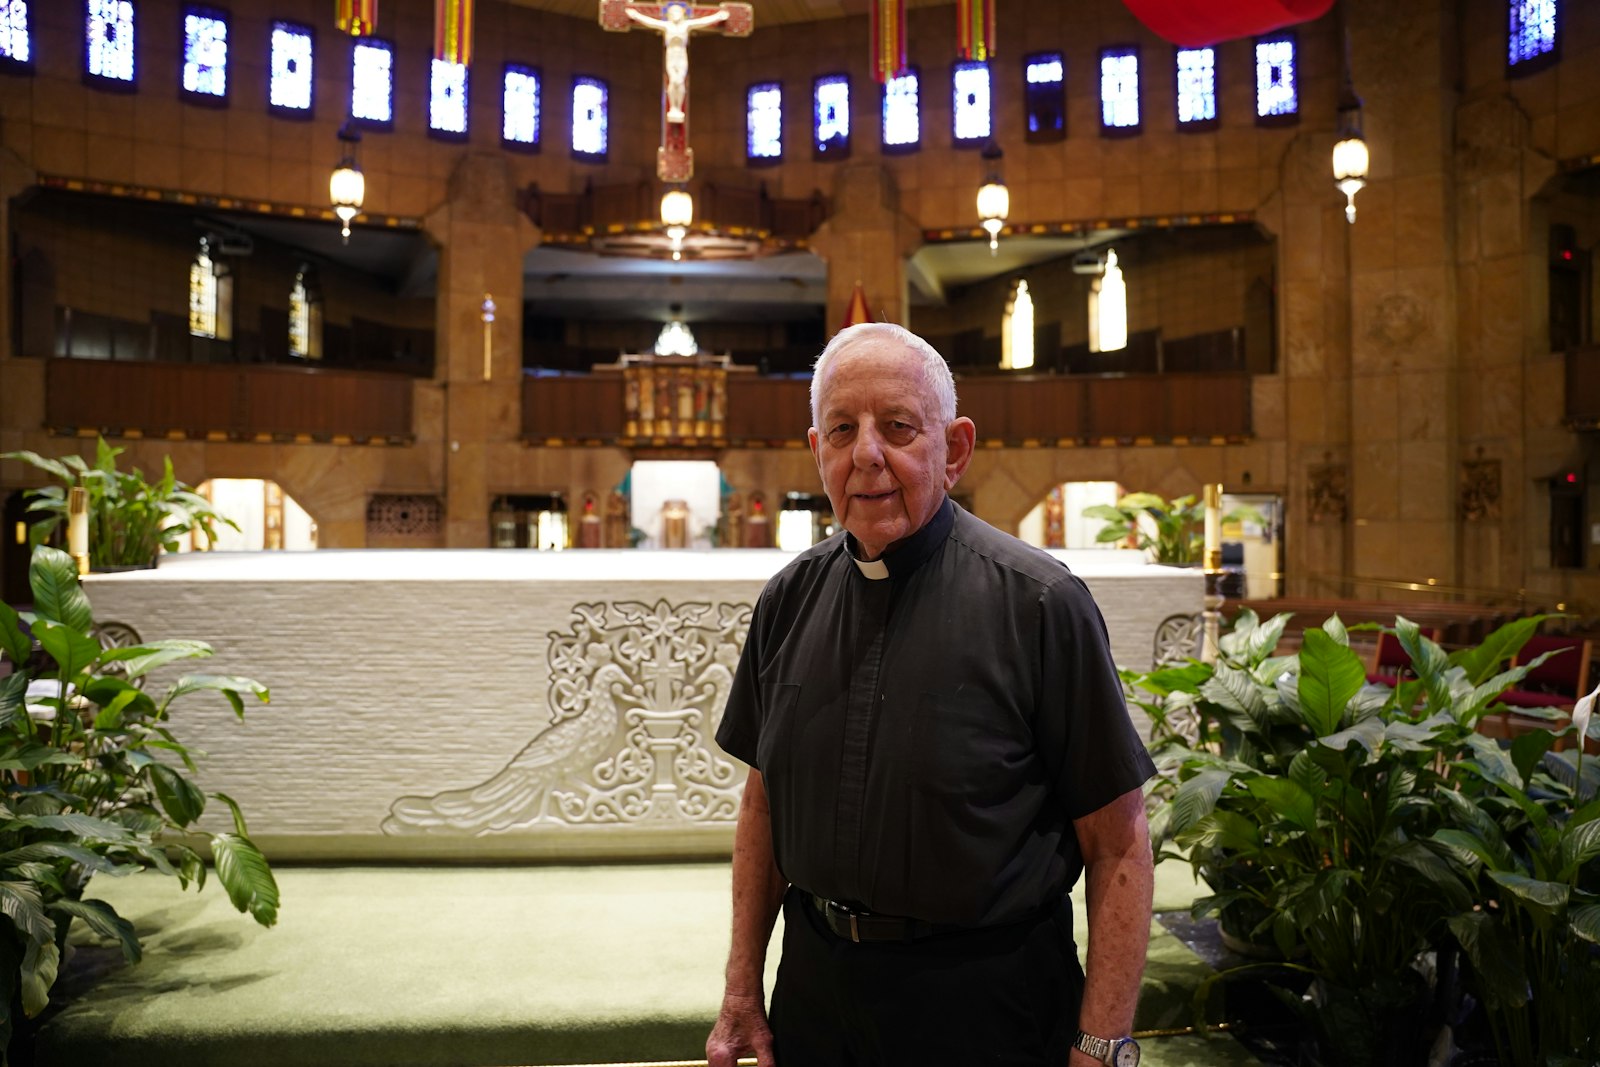 Learning to let go of fears and anxieties and trust in God's providence is a hurdle for every man who discerns the priesthood, Fr. Lang said. But with such trust comes great confidence in the surety of one's vocation, he added.